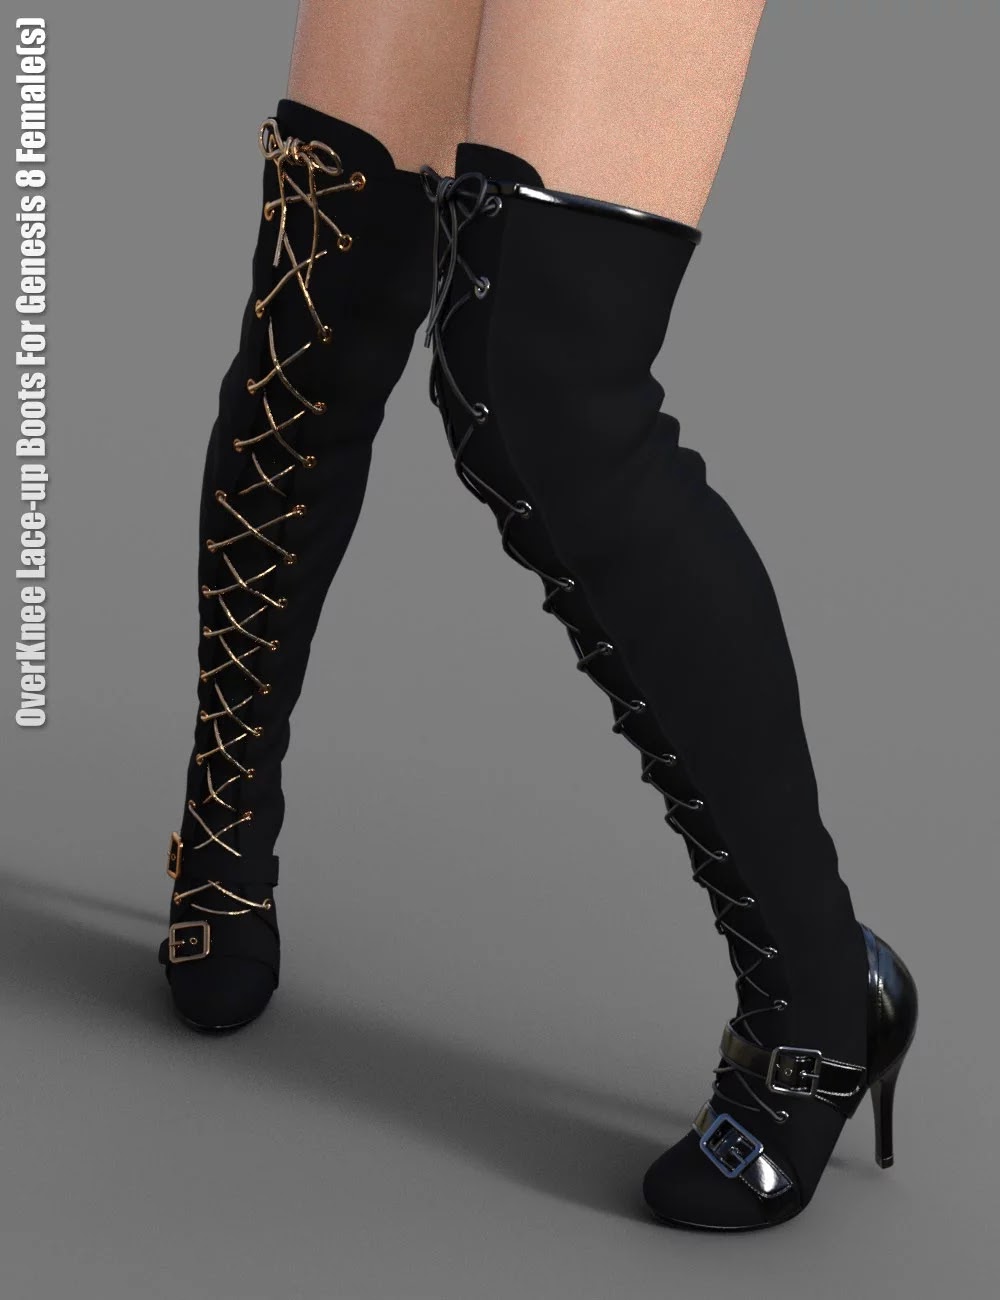 OverKnee Lace-Up Boots for Genesis 8 Female(s)_DAZ3DDL